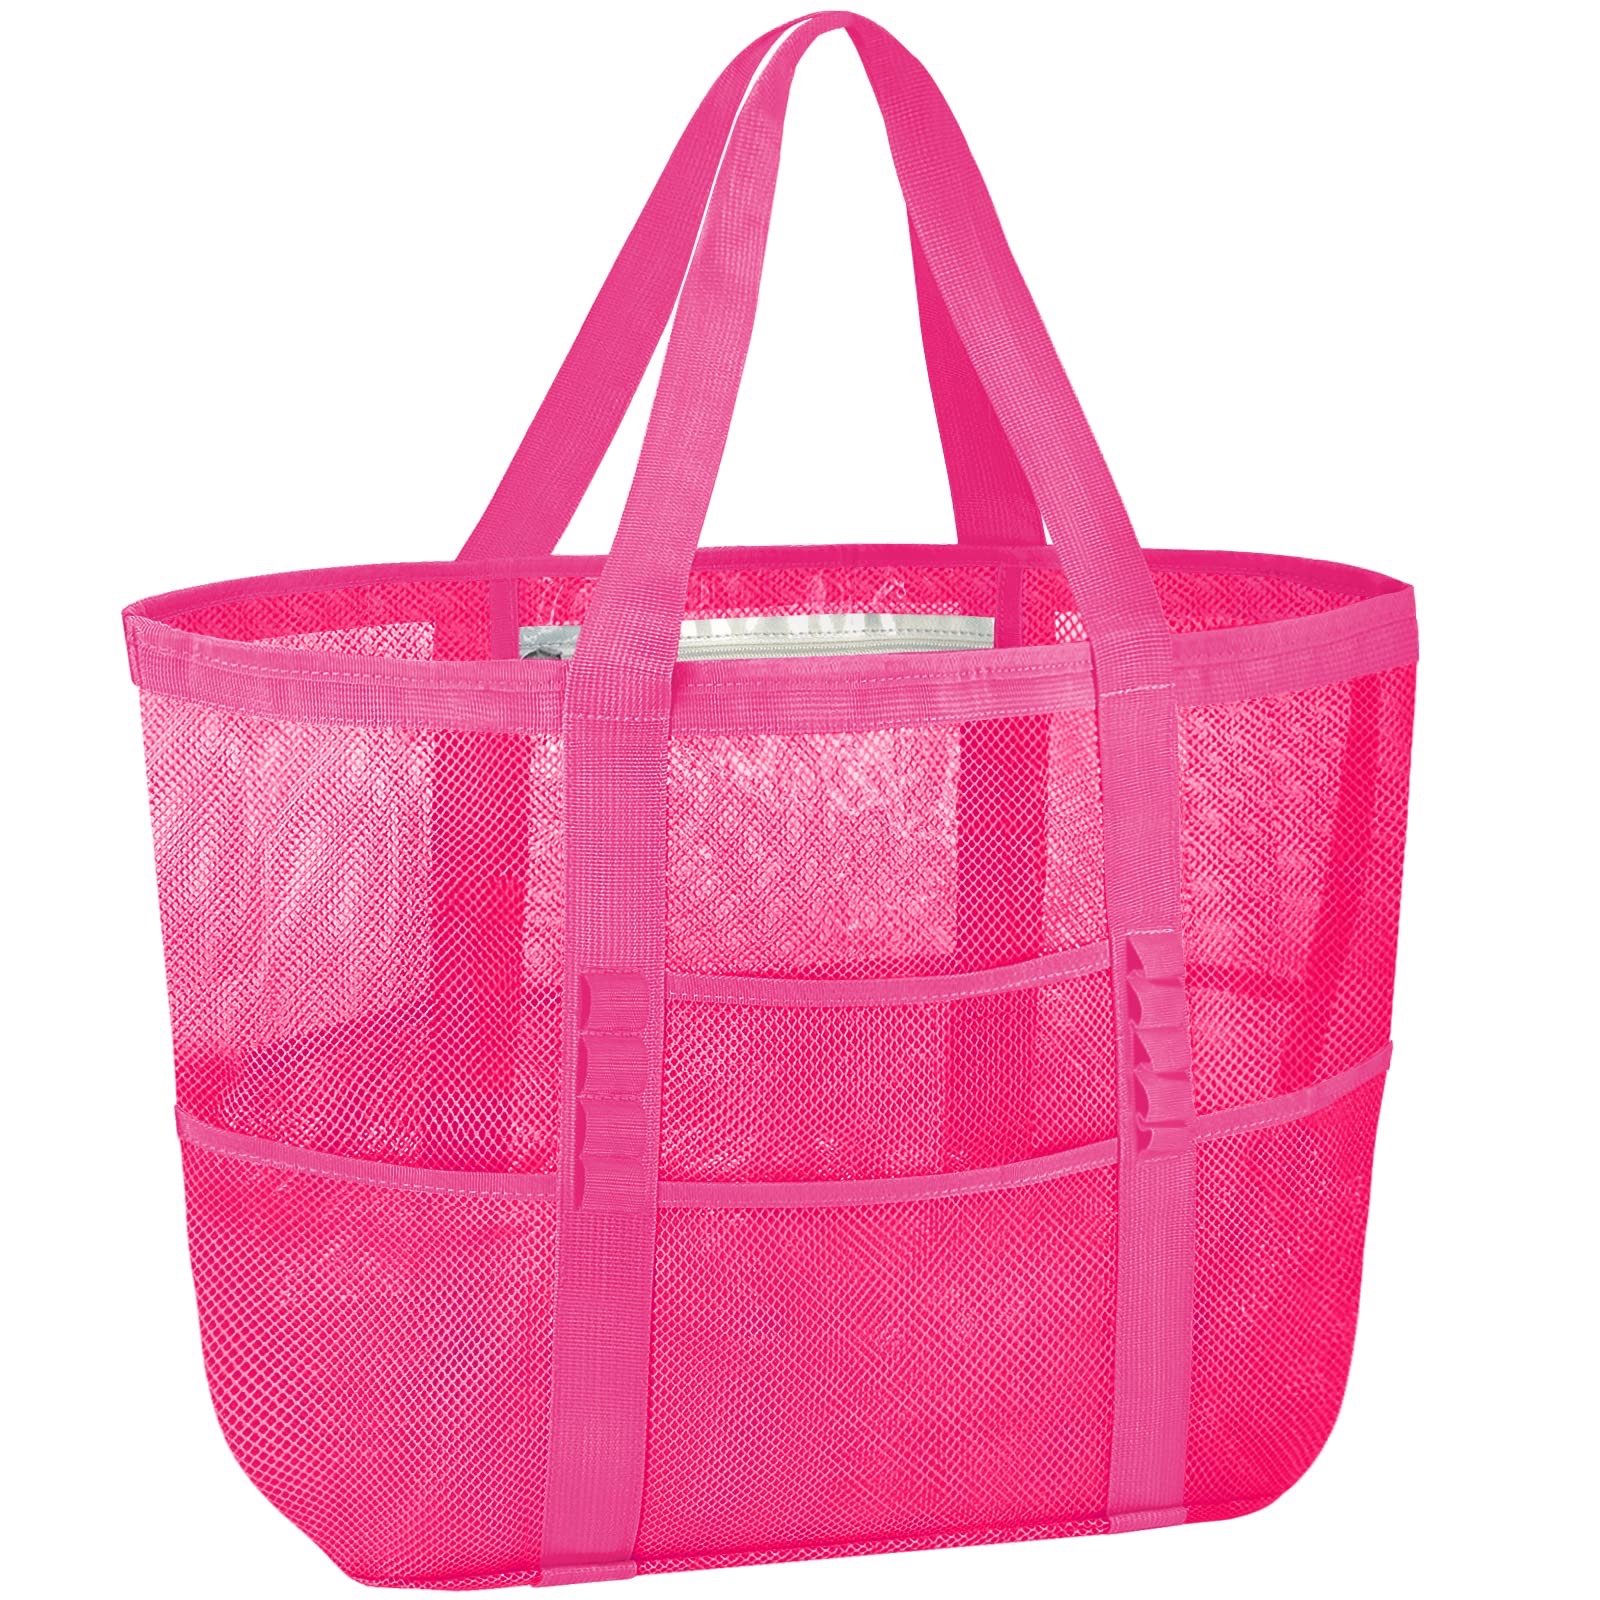 Amazon.com: BALEINE Large Beach Bag Pool Bags, Mesh Beach Tote for Toys, Towel, flip flops, Black : Clothing, Shoes & Jewelry